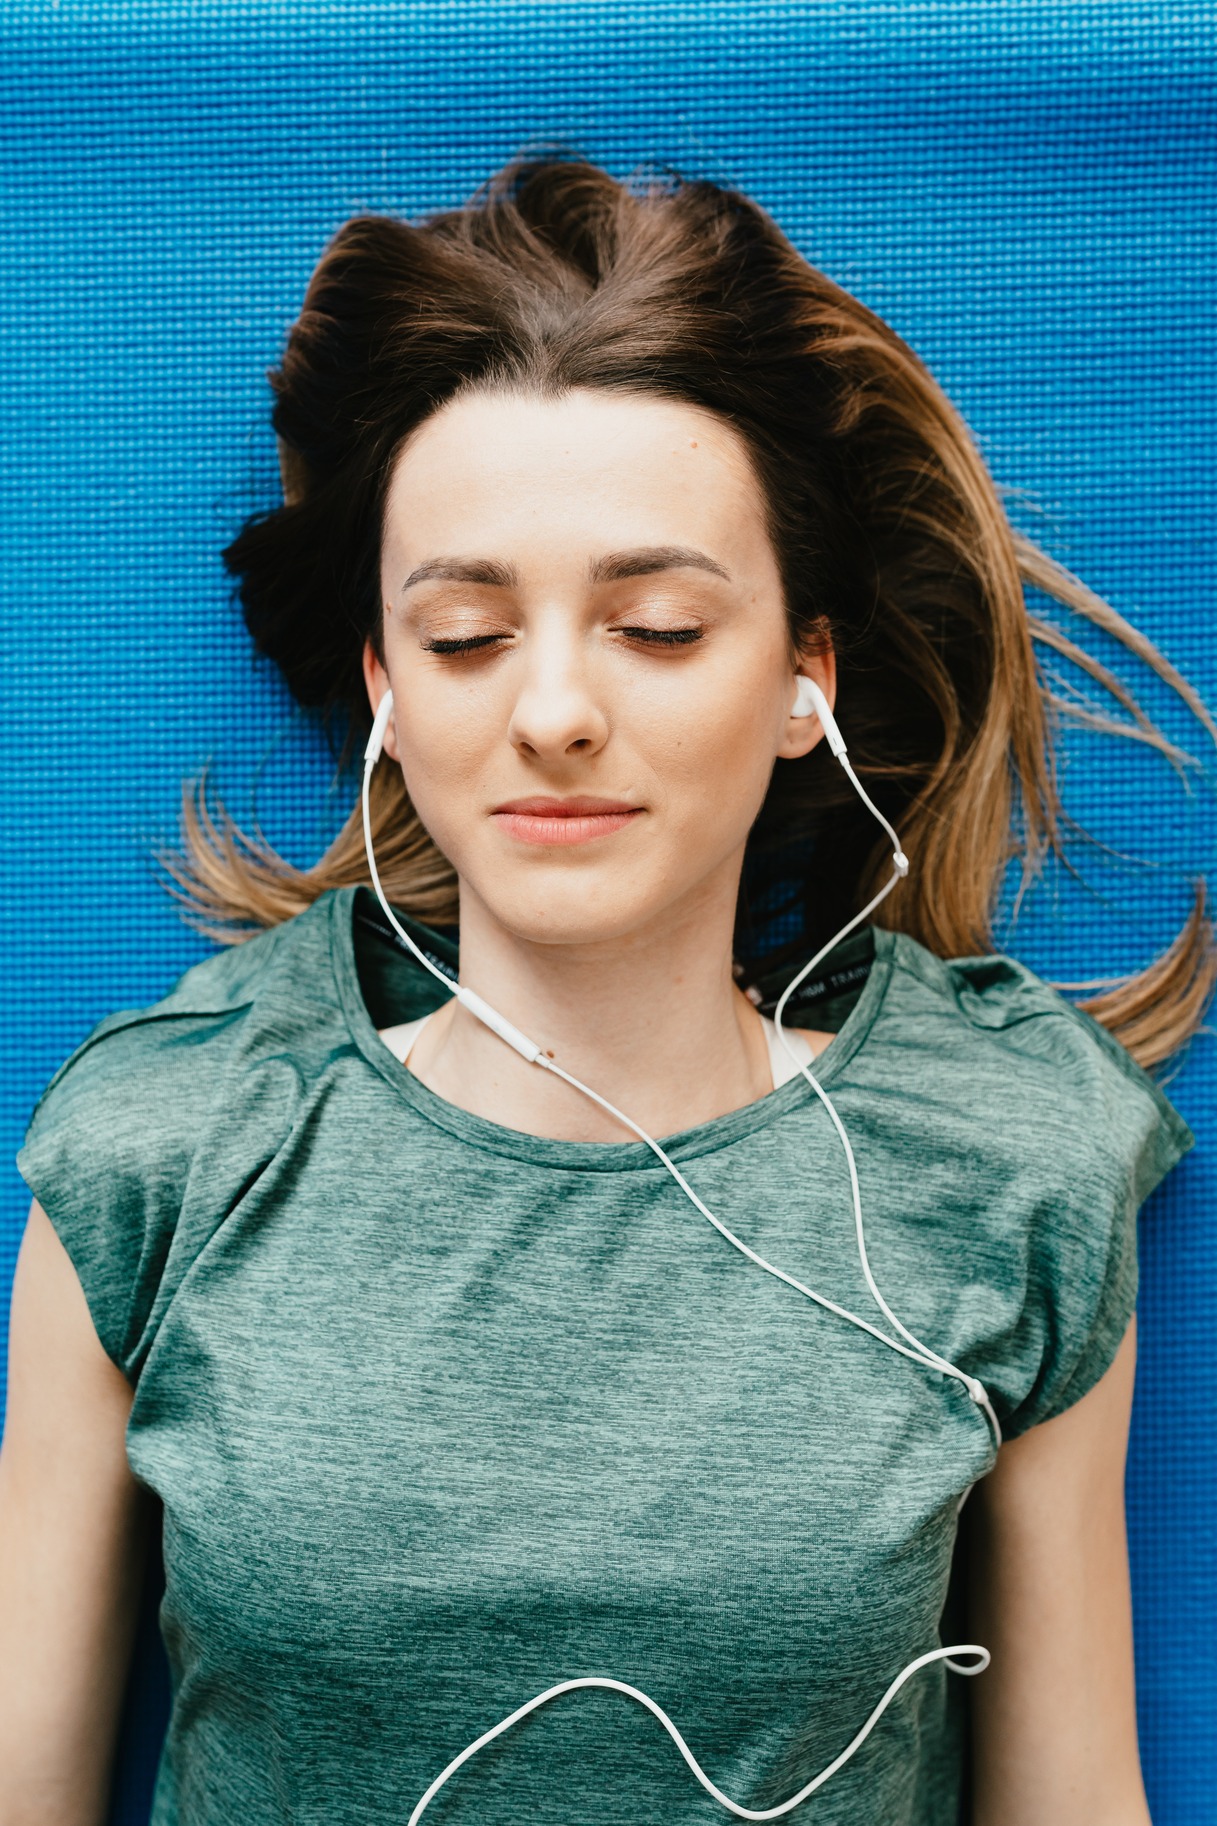 A woman sleeping on a blue background, with earphones in.